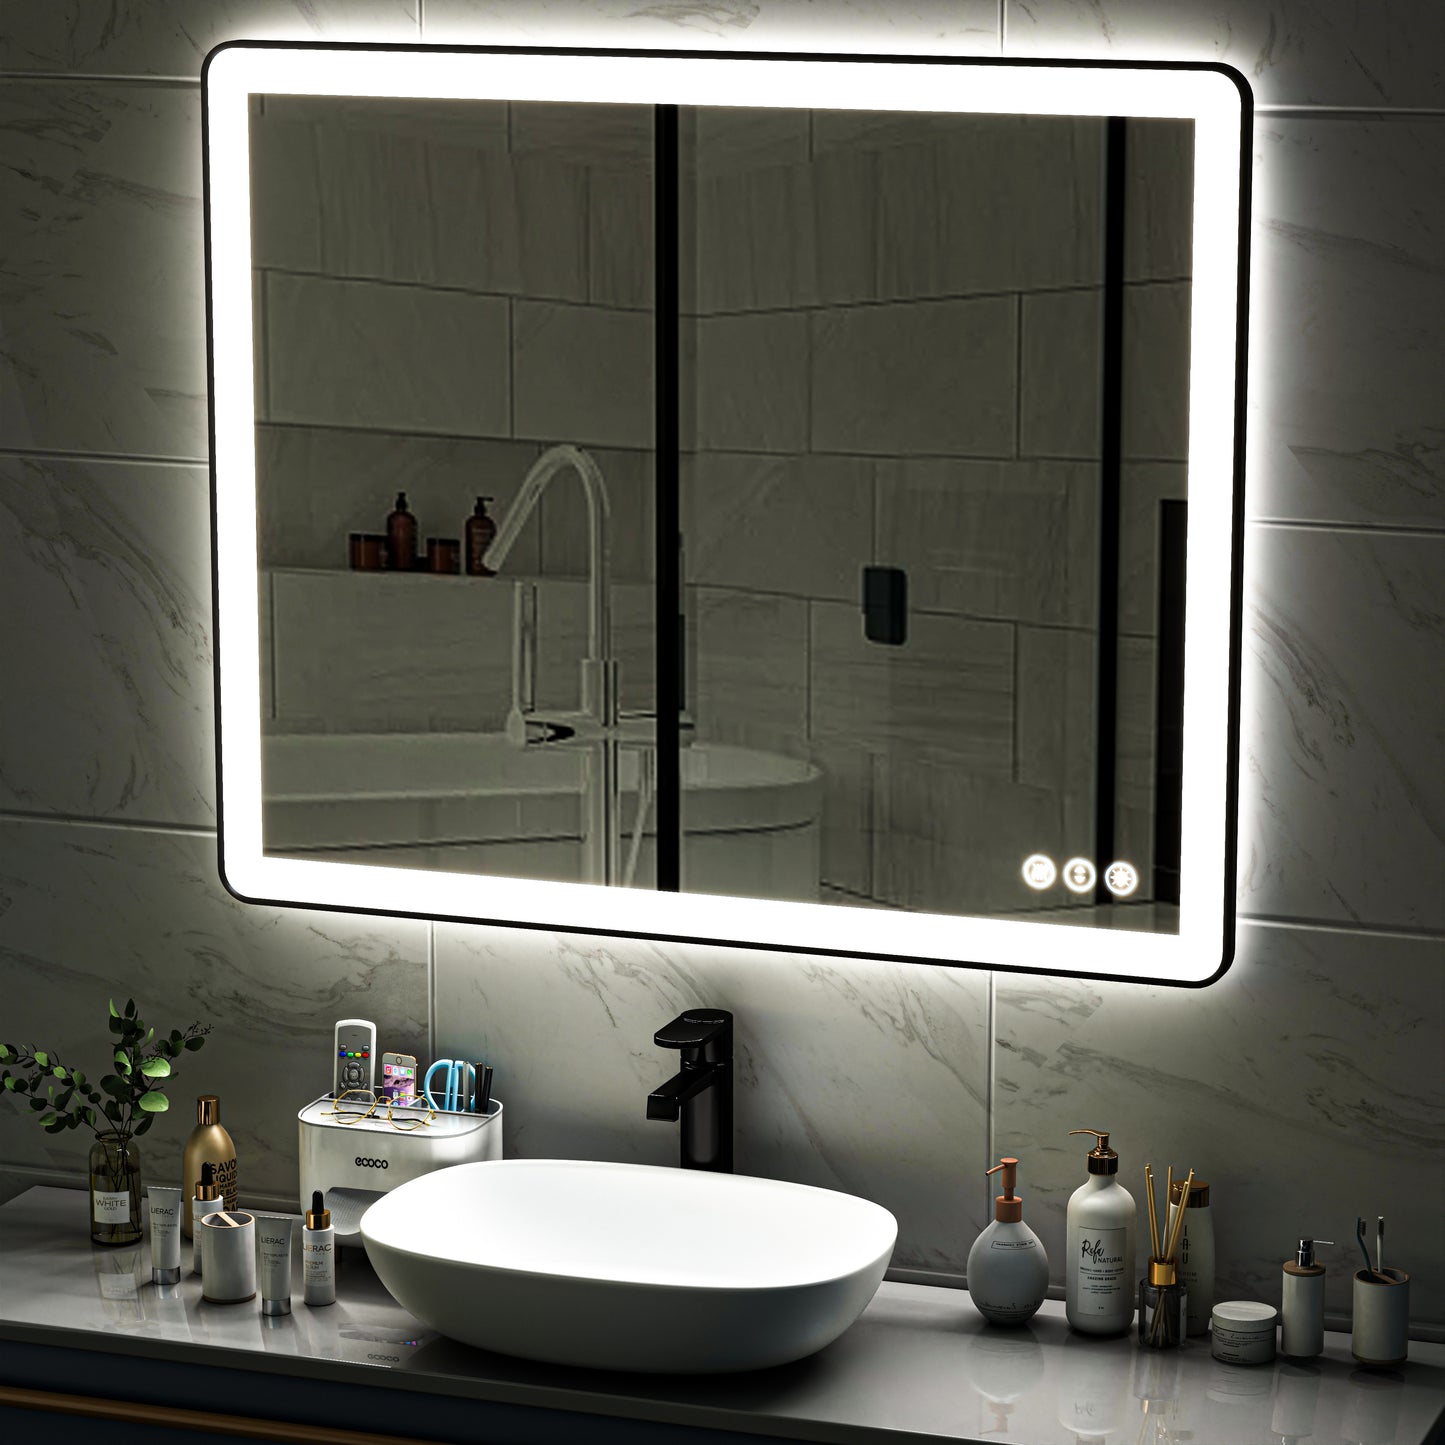 Waterpar® 48 in. W x 40 in. H Rectangular Framed Anti-Fog LED Wall Bathroom Vanity Mirror in Black with Backlit and Front Light